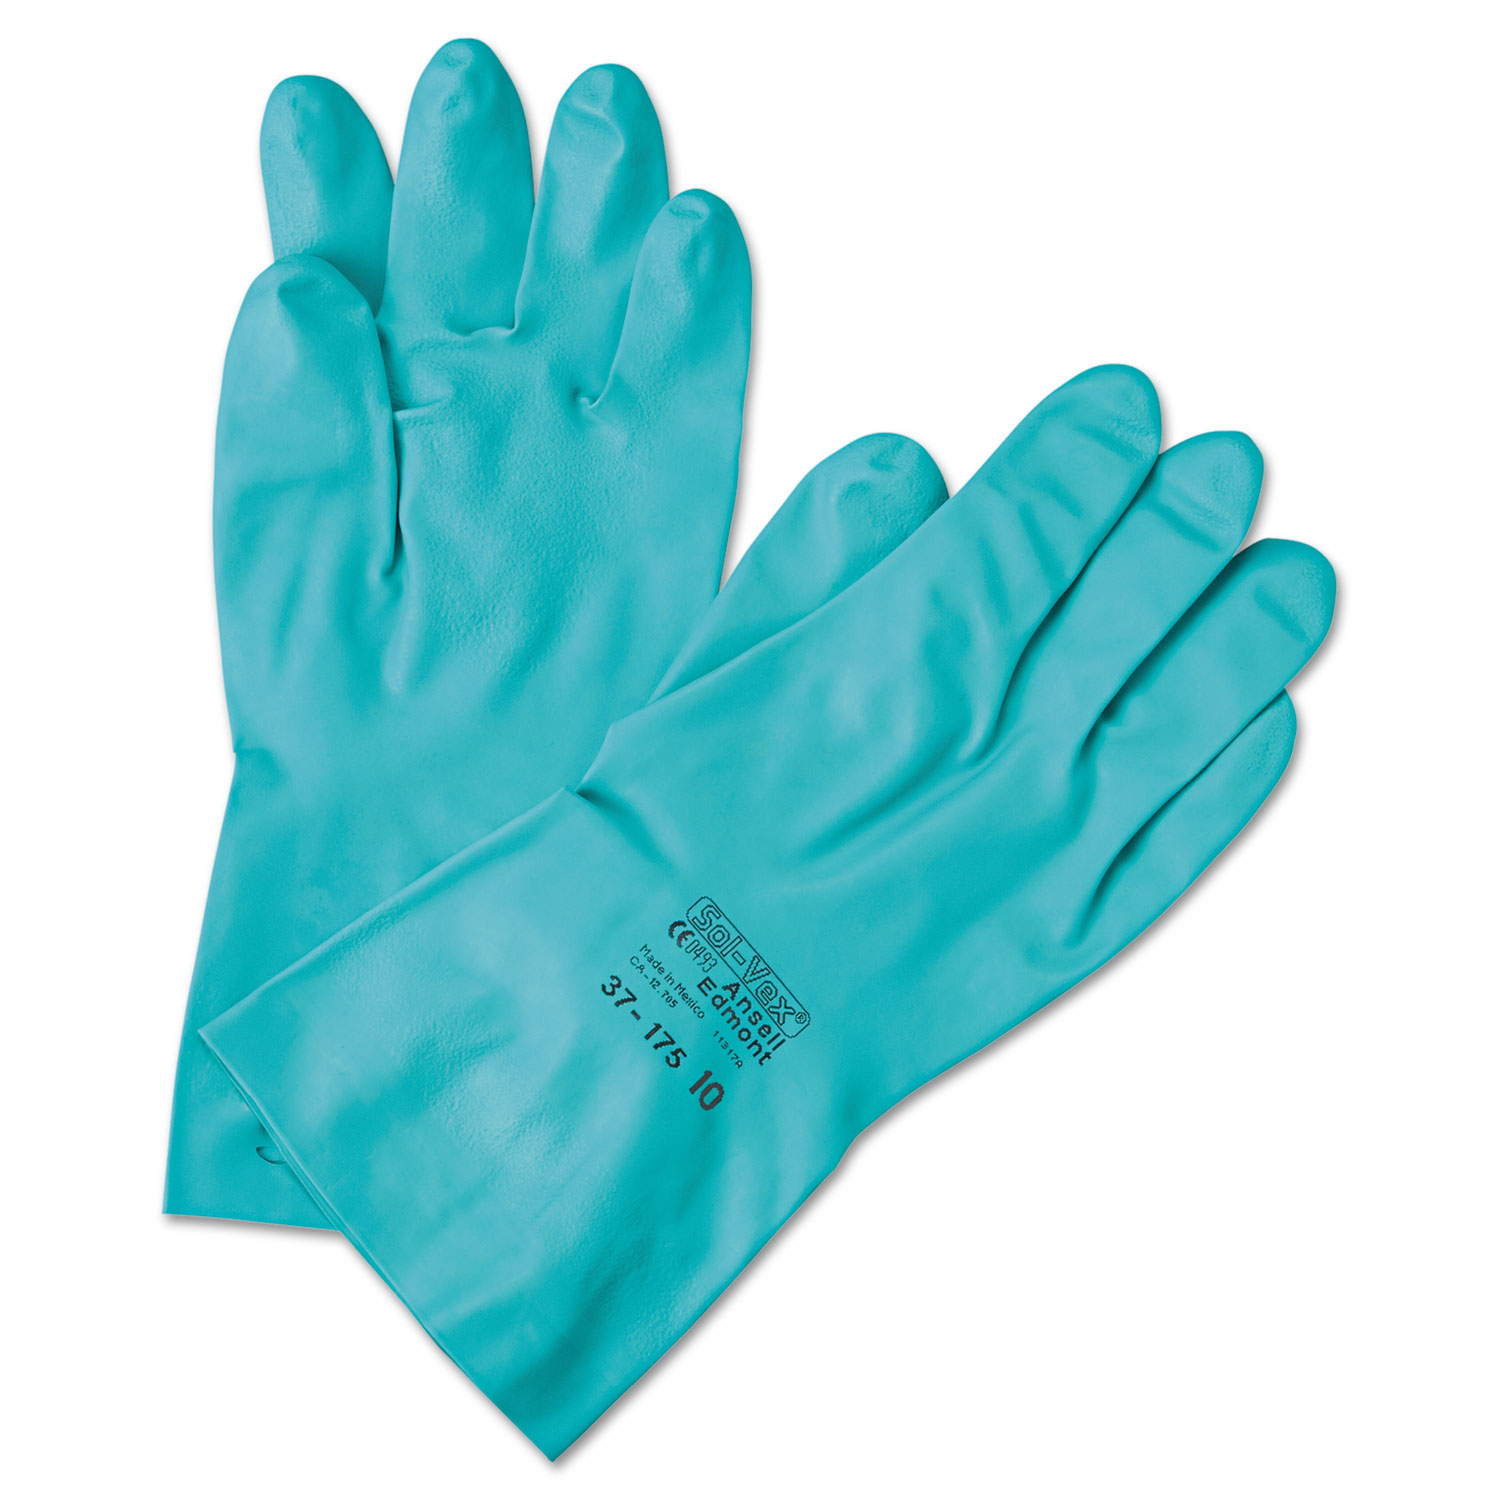  AnsellPro 102944 Sol-Vex Sandpatch-Grip Nitrile Gloves, Green, Size 8 (ANS371858) 